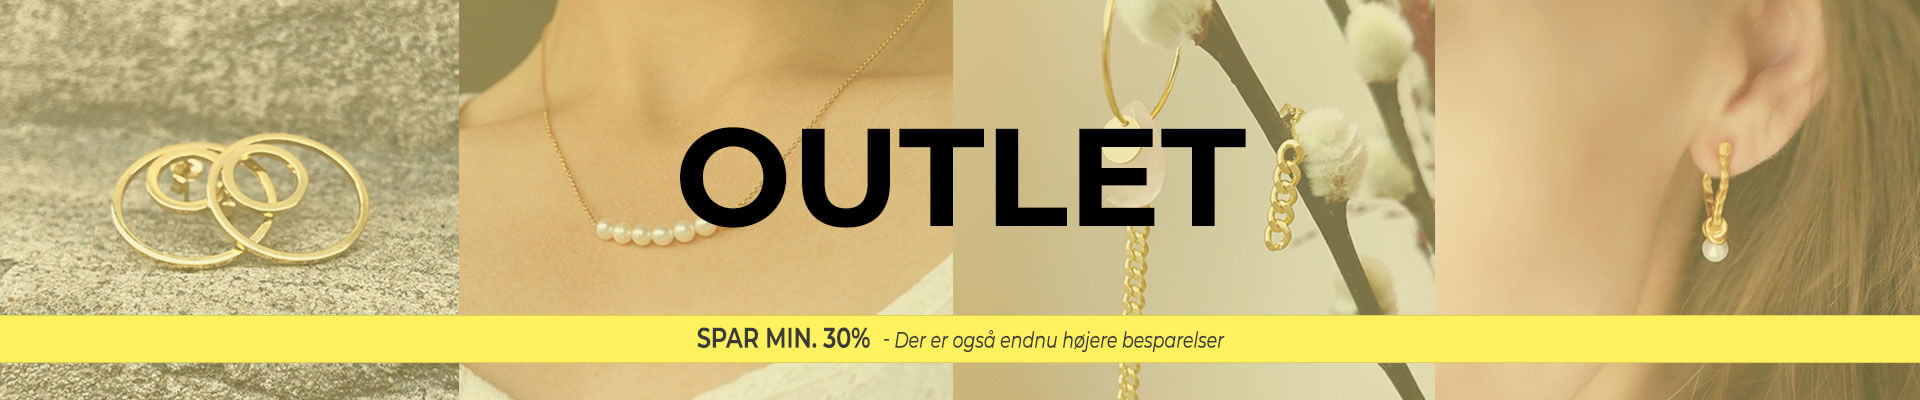 Outlet Ure